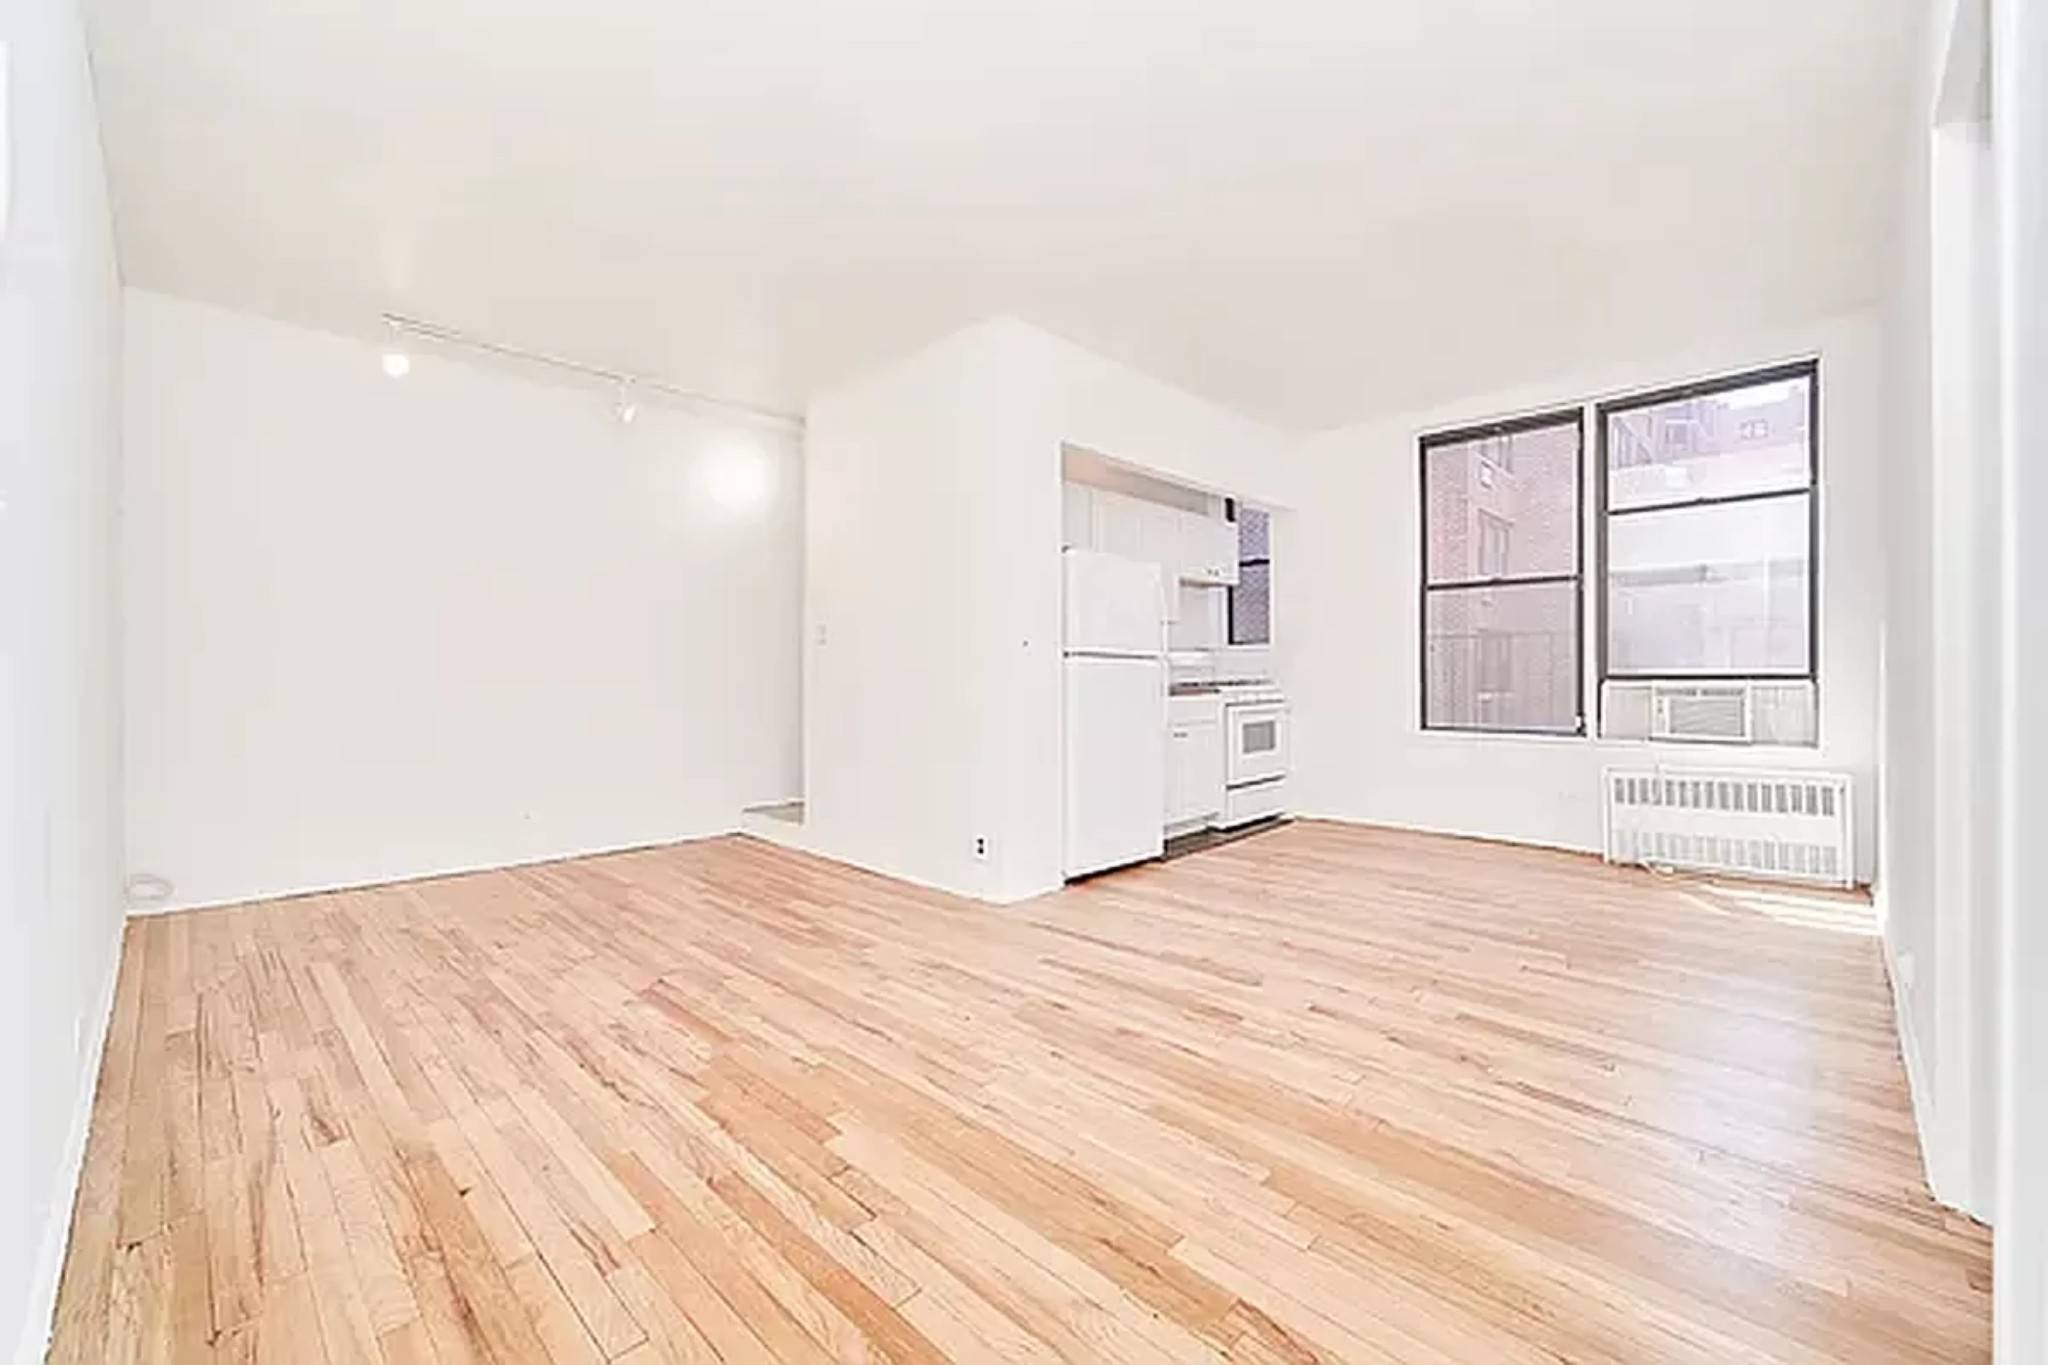 Bright amp ; large one bedroom in Gramercy Apartment Features Natural light Spacious living area Queen sized bedroom w built in closet Building Features Elevator Laundry Live in super